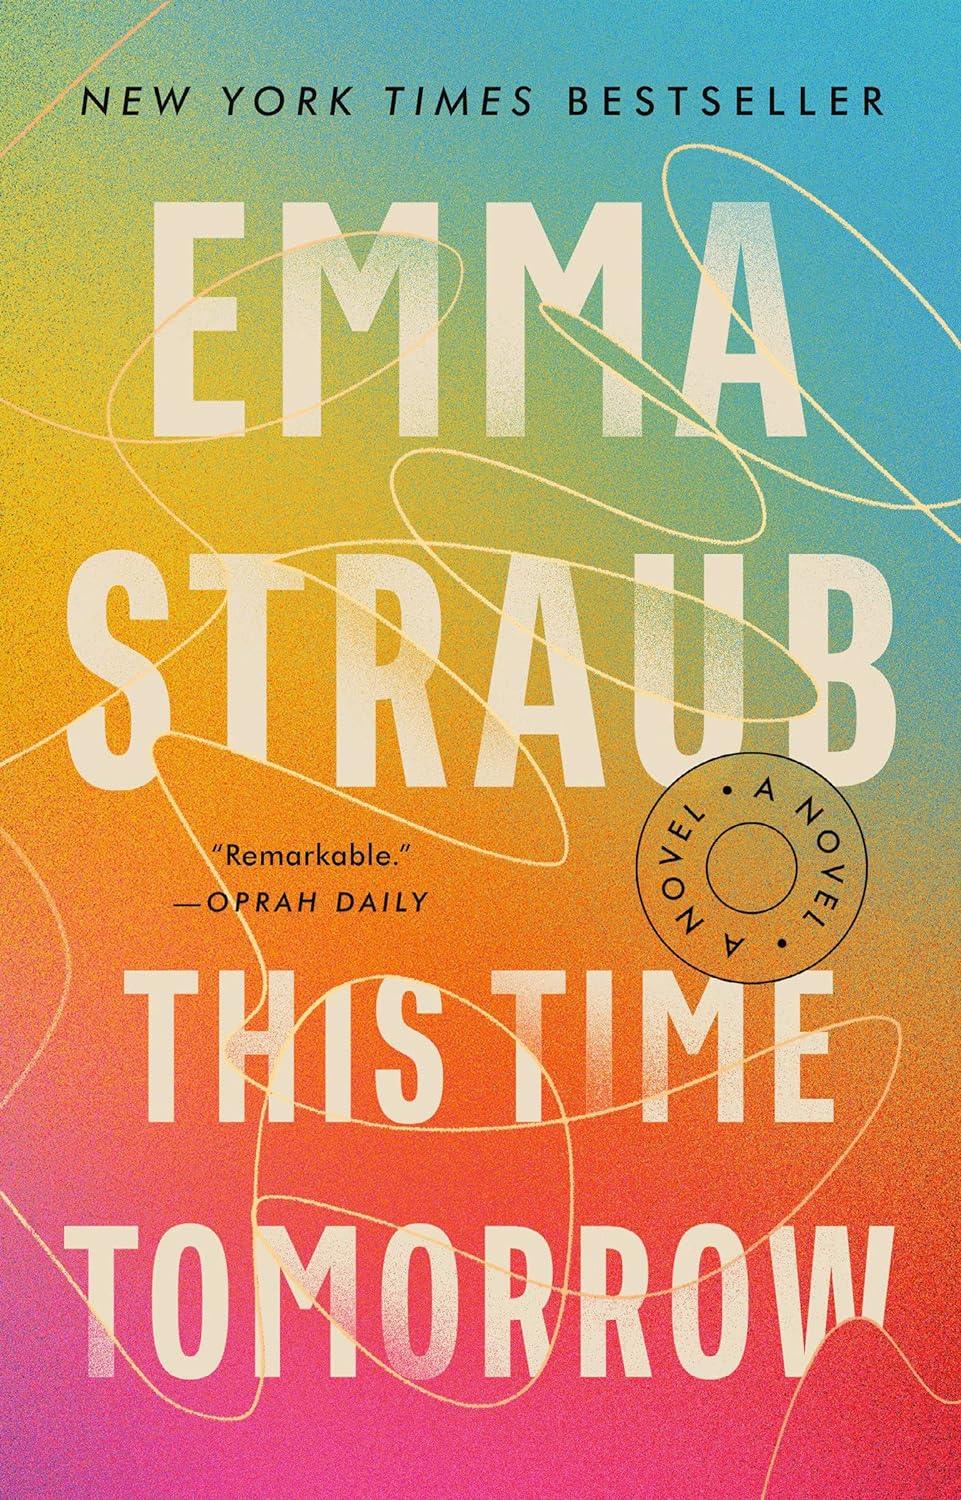 This Time Tomorrow - A Novel by Emma Straub, New York Times Bestseller